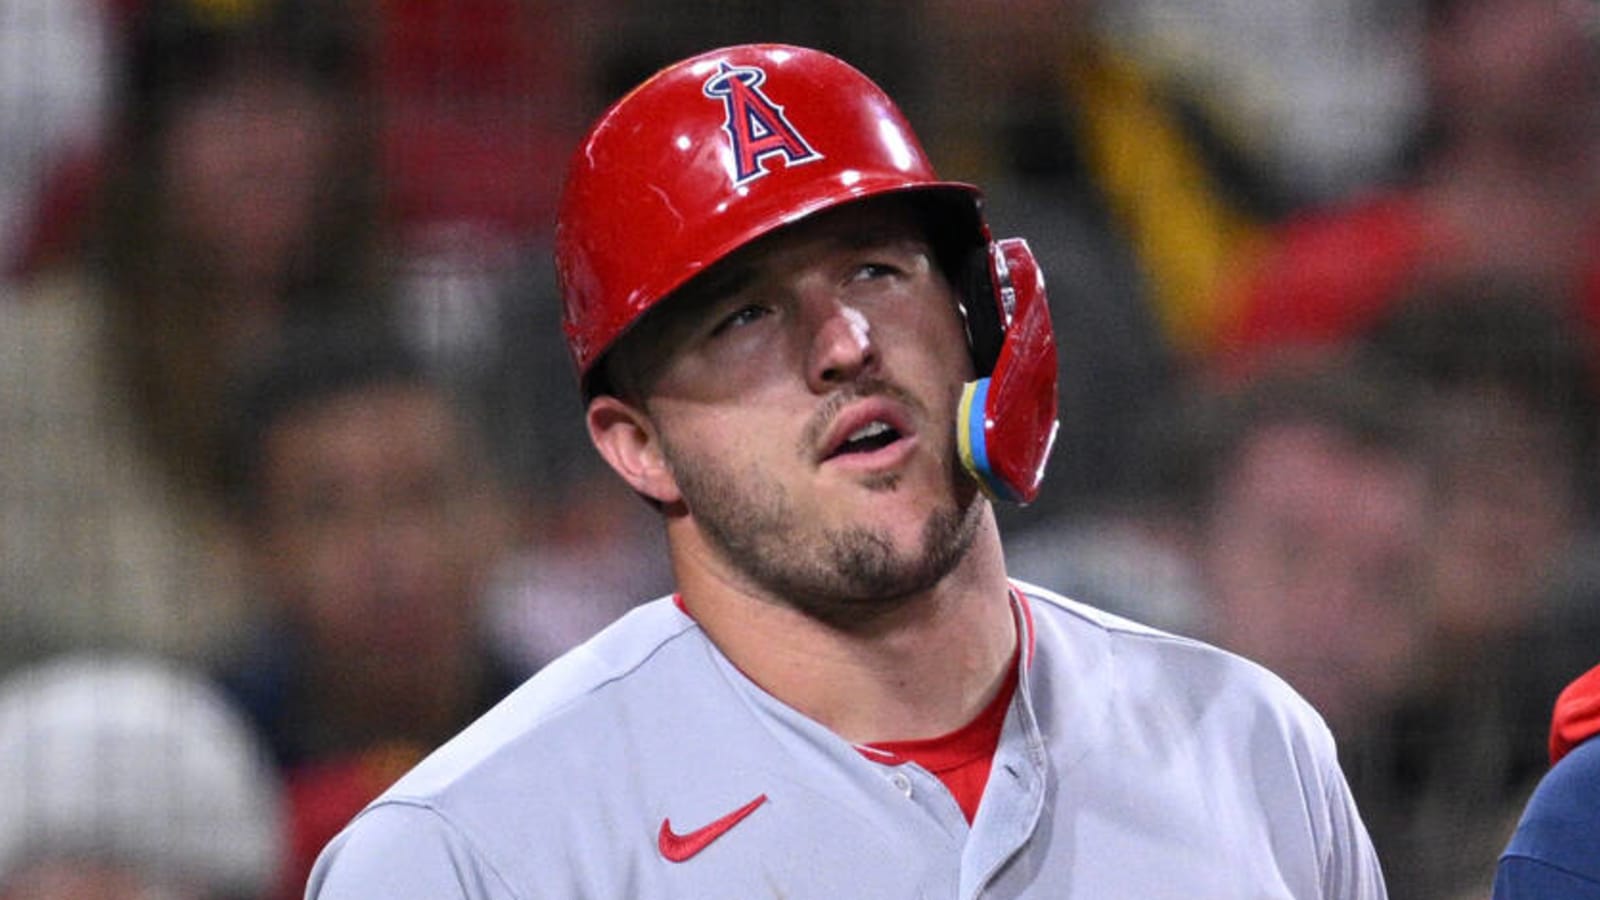 Angels' Mike Trout provides update on his injury Yardbarker